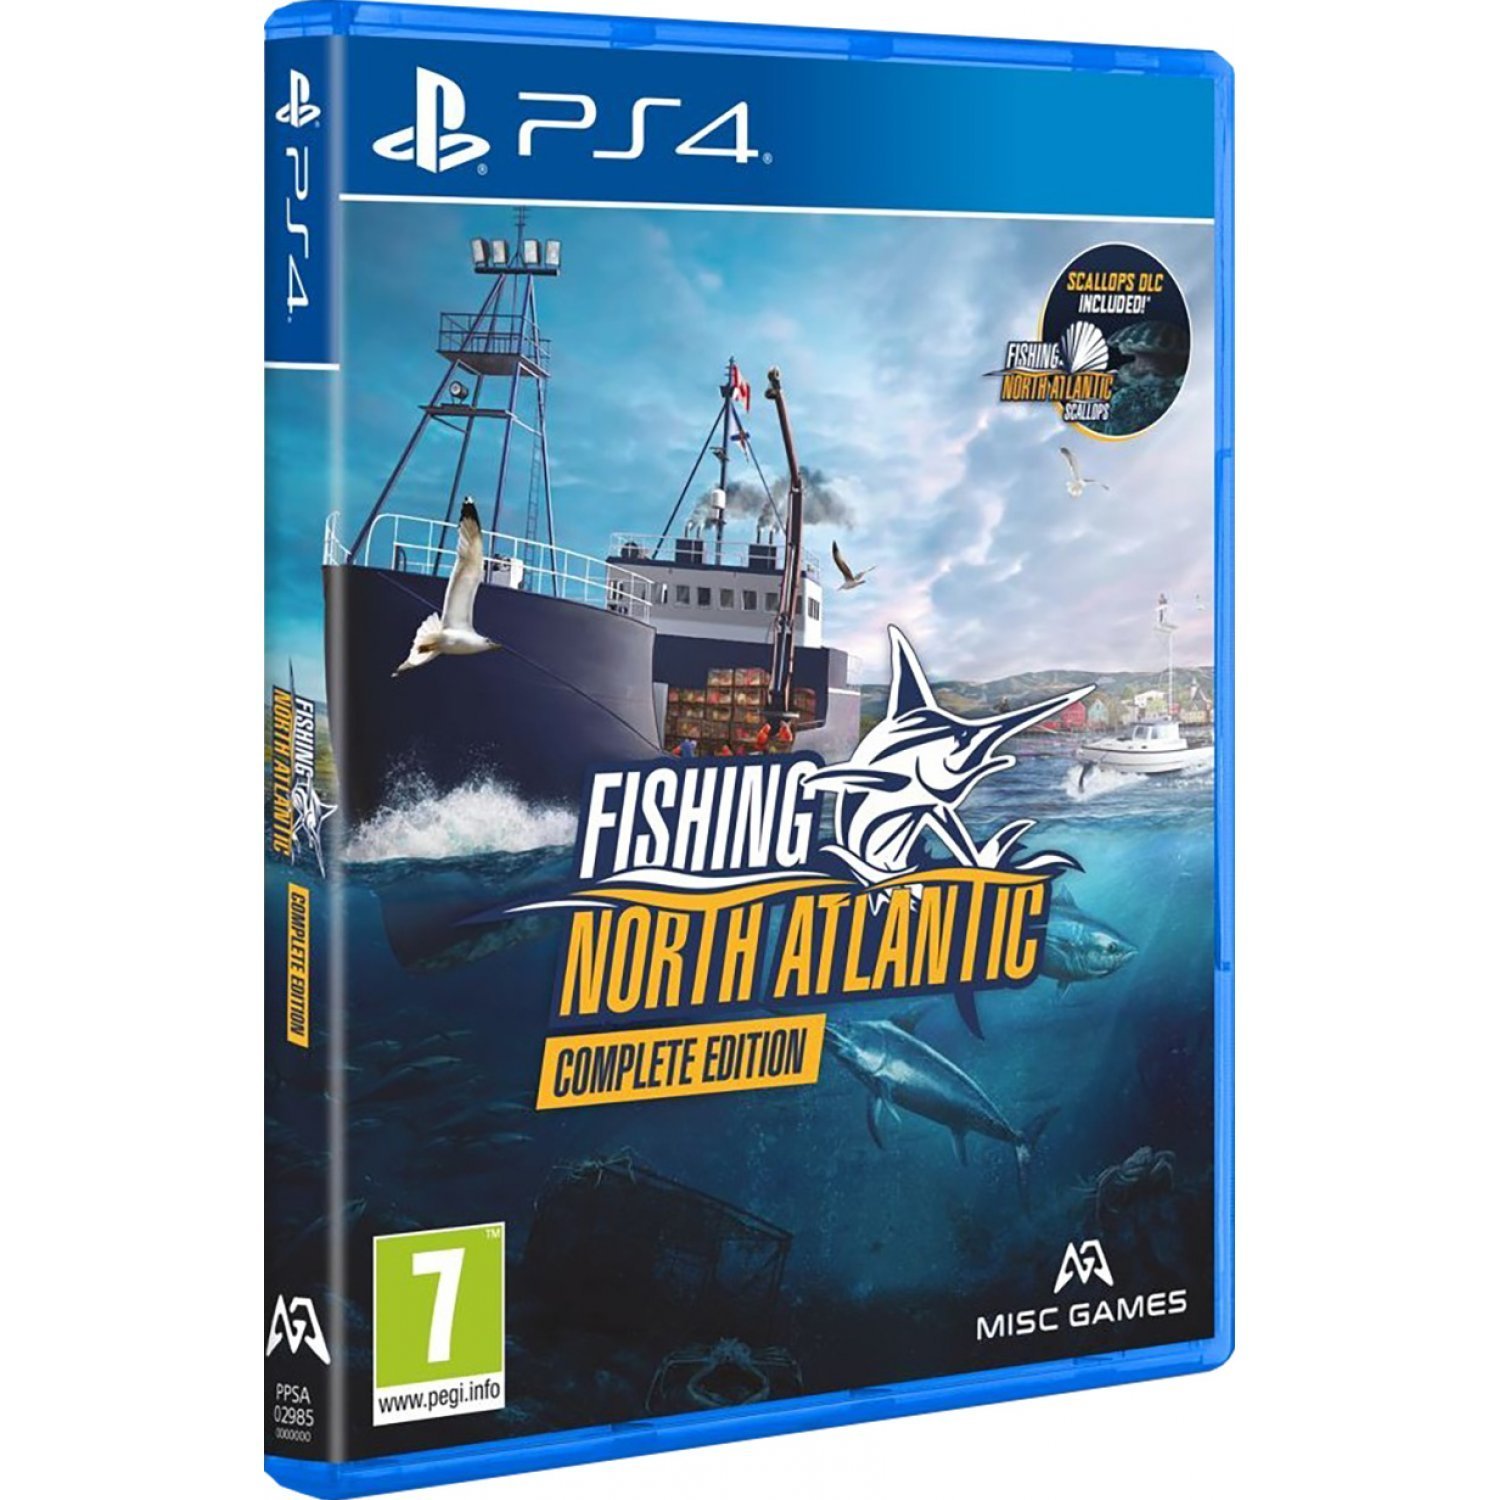 Buy Fishing: North Atlantic (Complete Edition) - PlayStation 4 - Complete  Collection - English